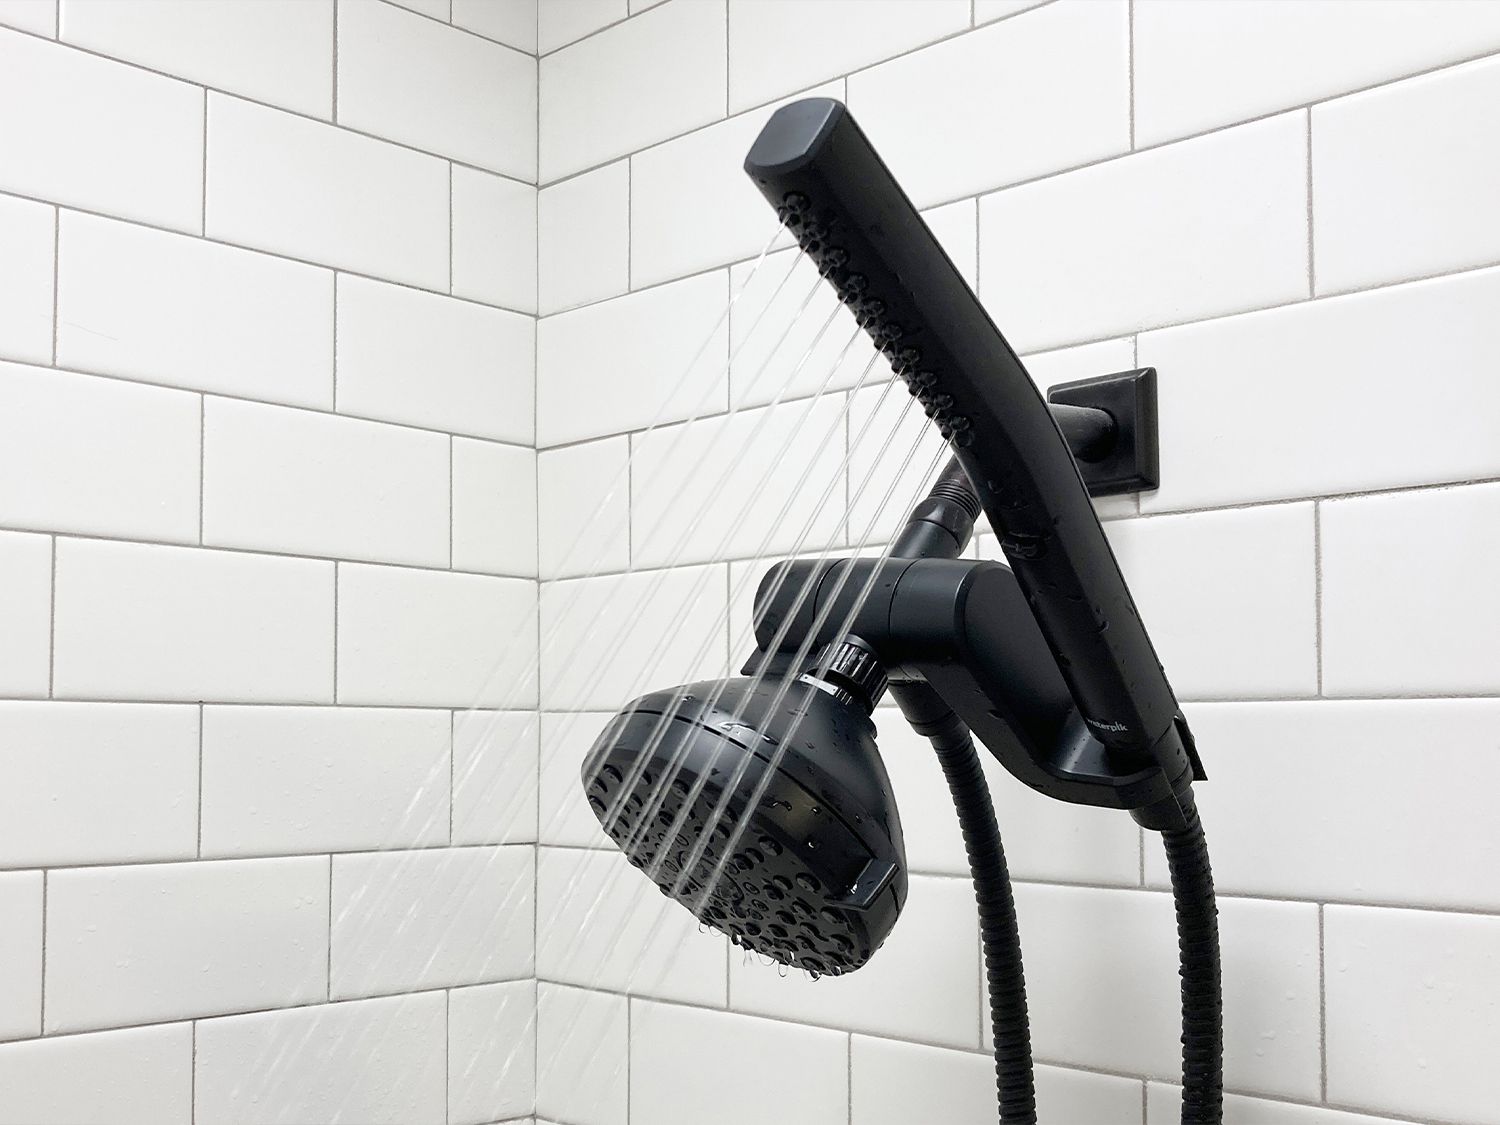 Can I Buy Just An On/Off Control For Shower When Installing A Handheld Showerhead